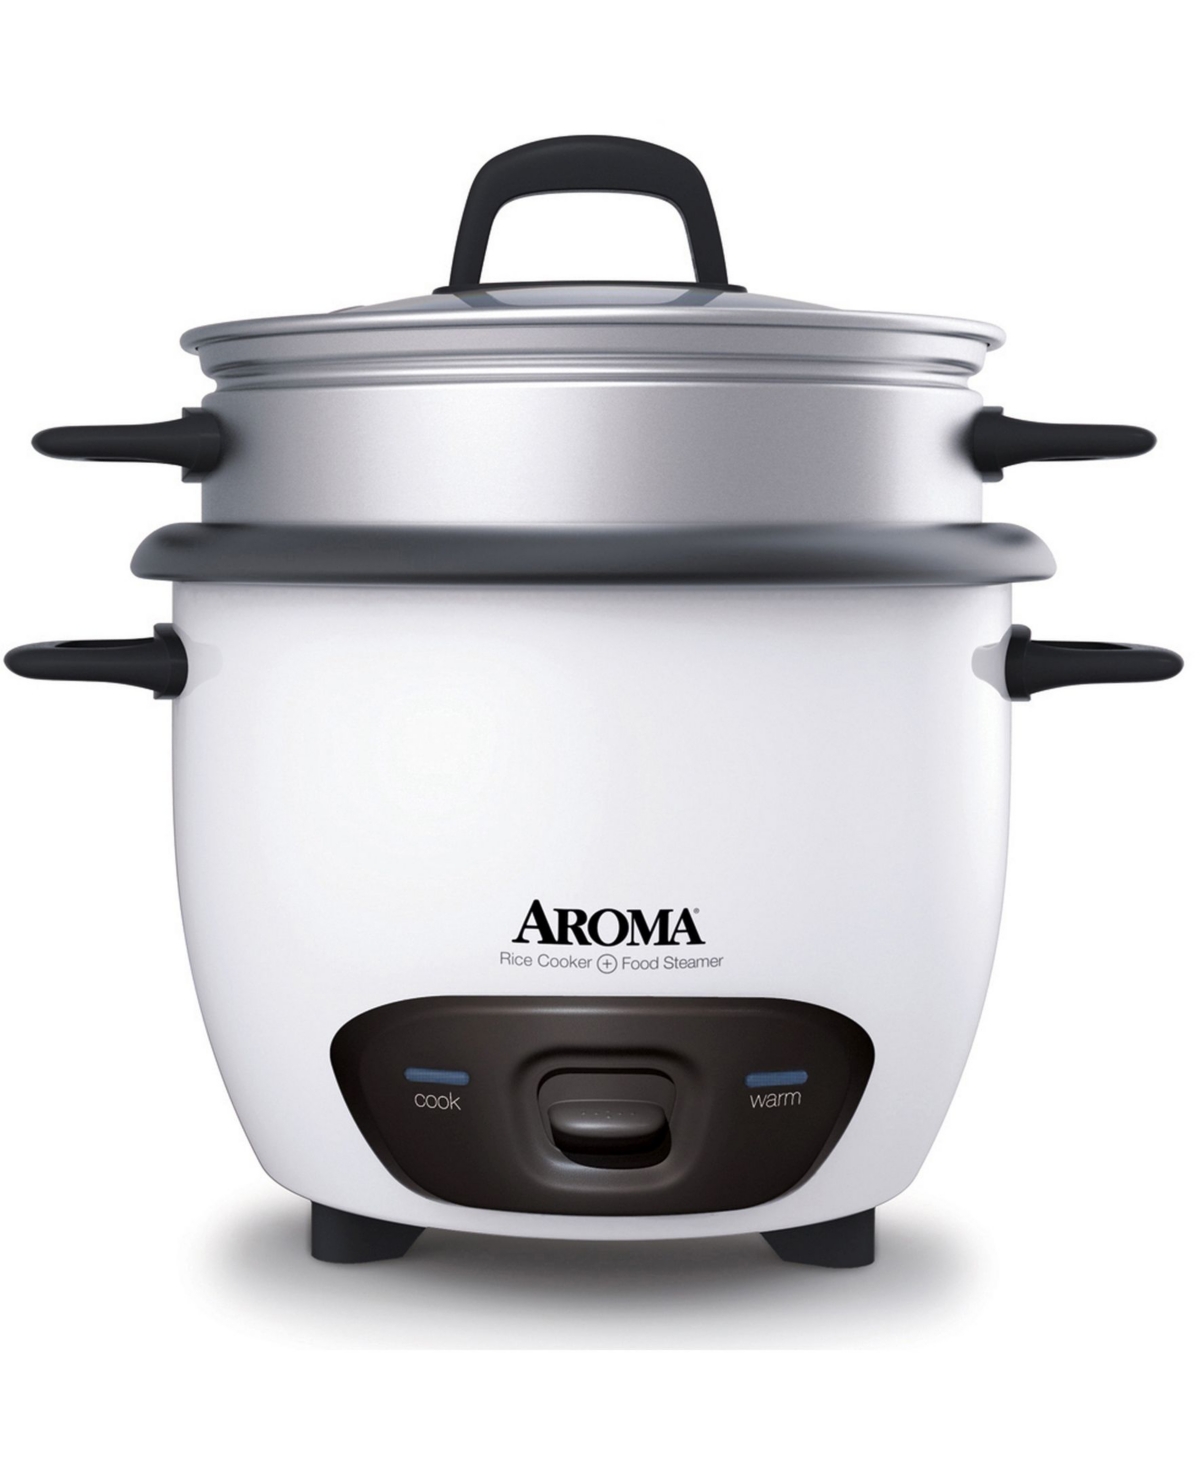 Aroma Arc-747-1NG 14 Cup Rice Cooker and Food Steamer